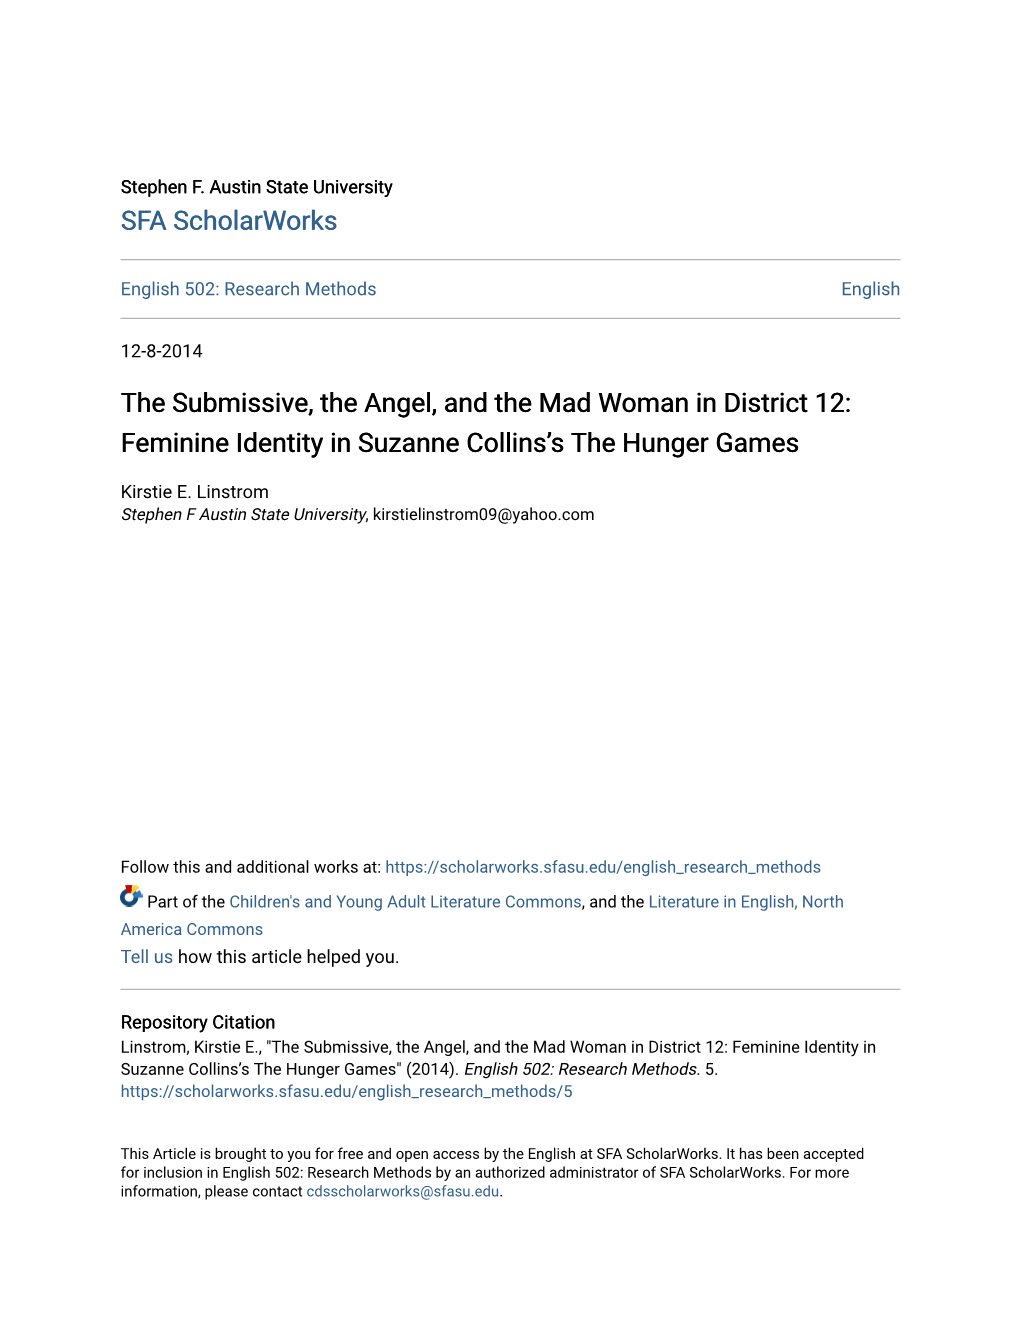 The Submissive, the Angel, and the Mad Woman in District 12: Feminine Identity in Suzanne Collins’S the Hunger Games